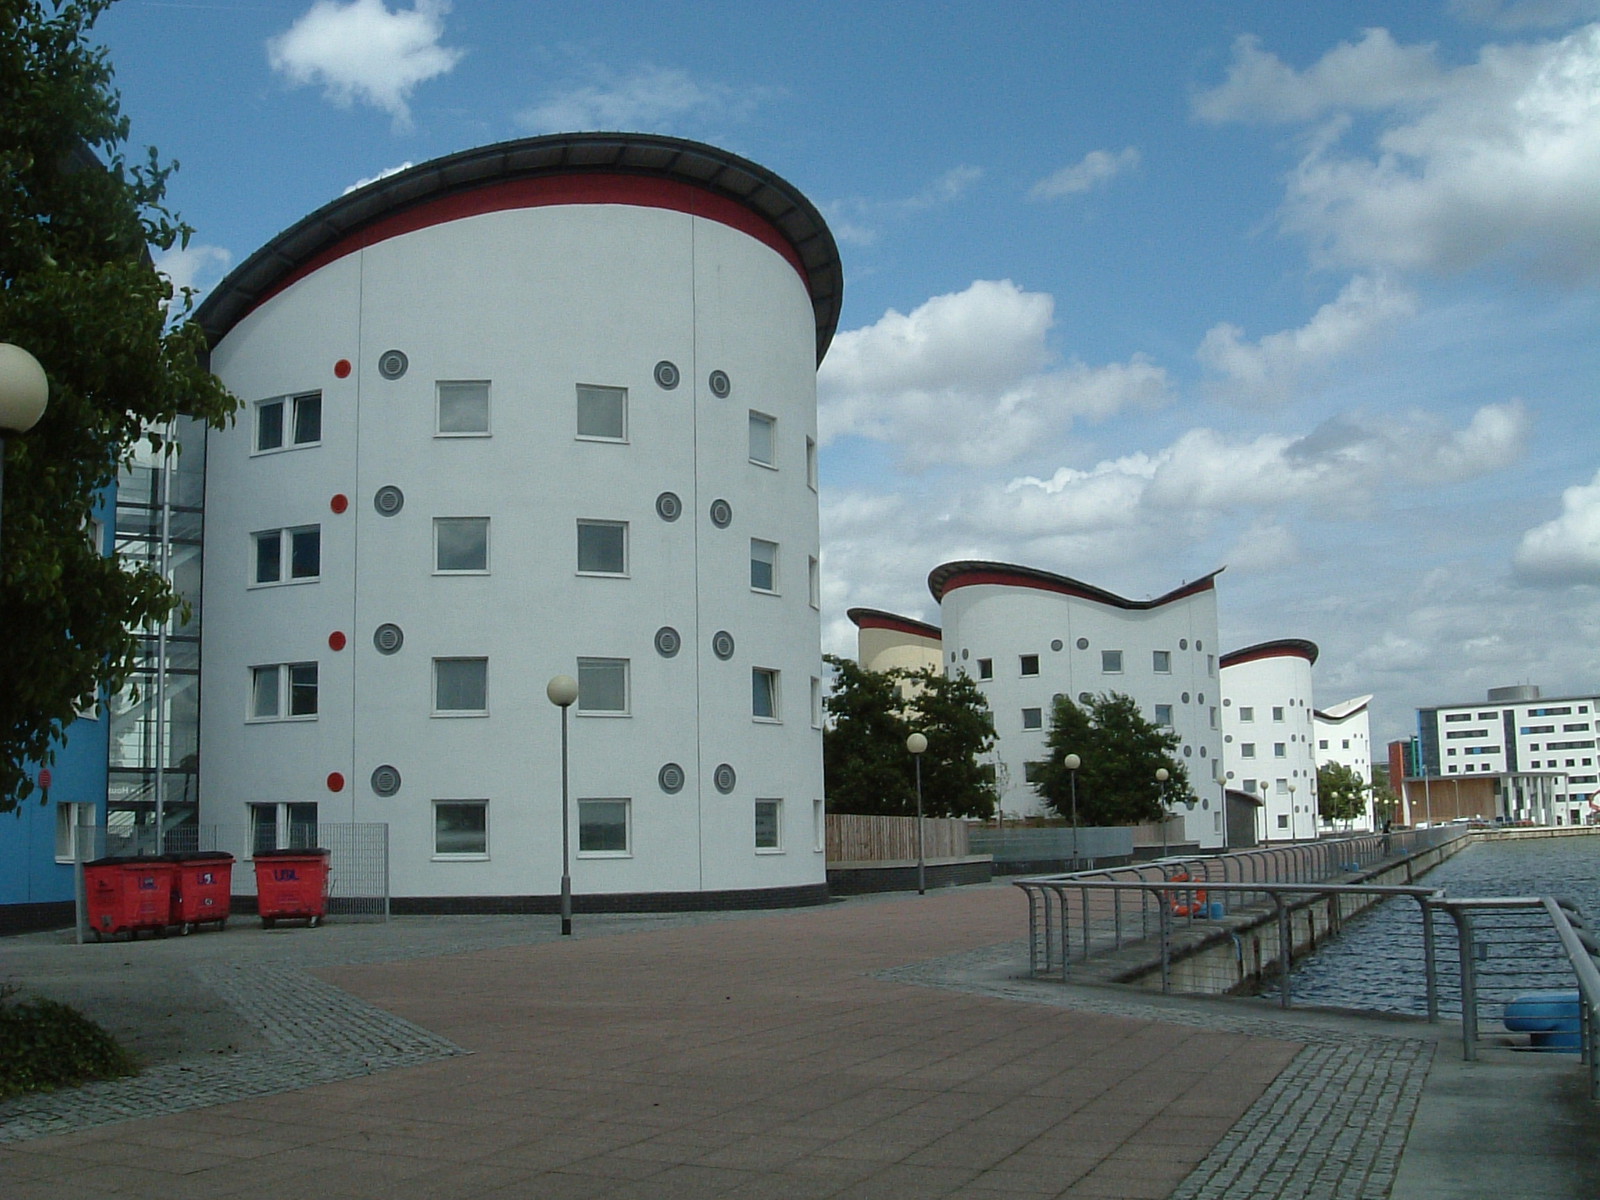 The Docklands Campus of the University of East London